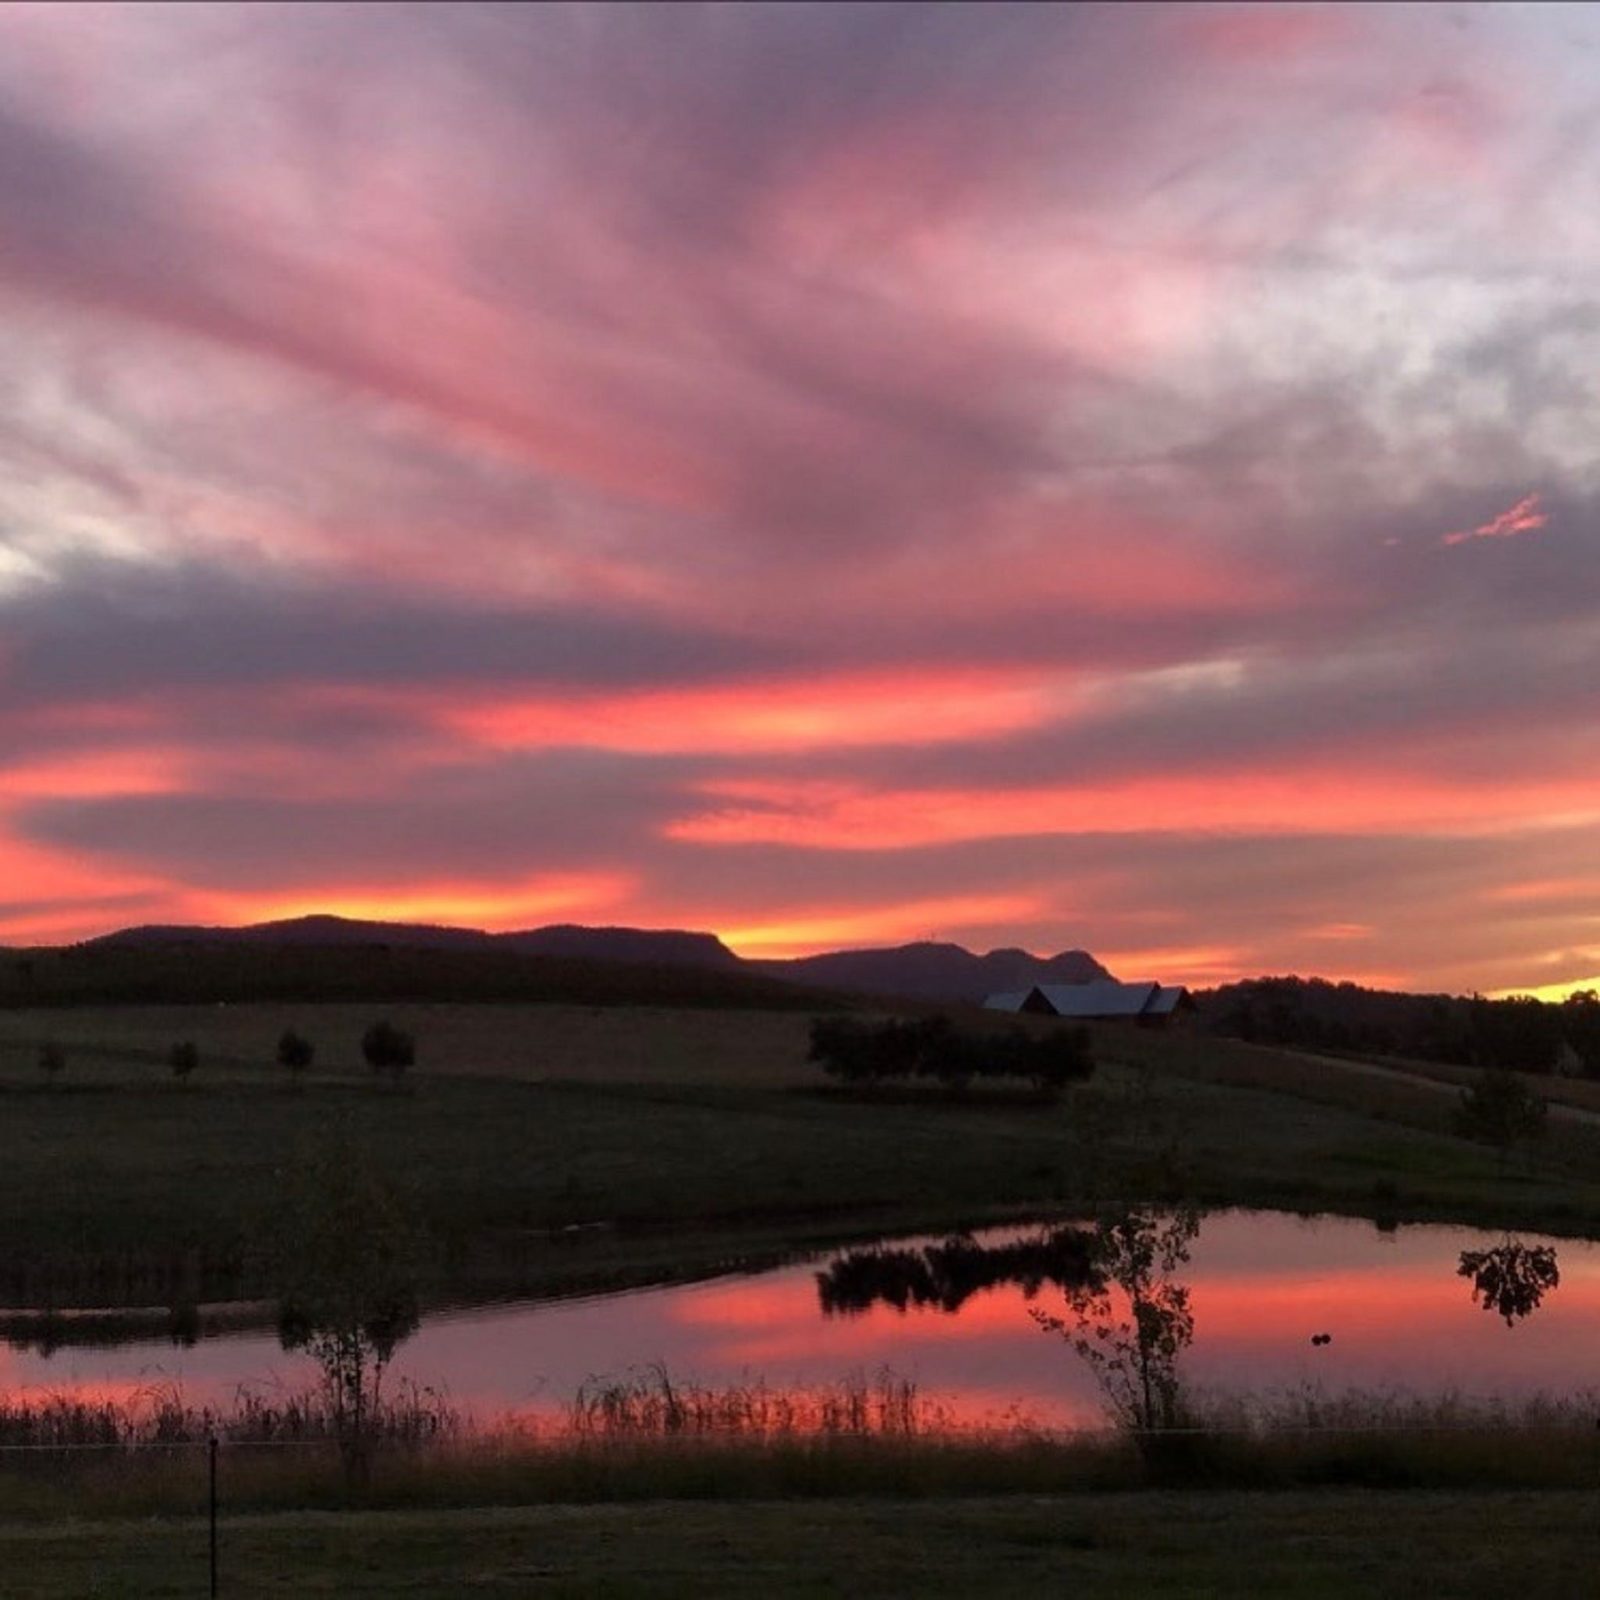 One of the best Hunter Valley sunsets